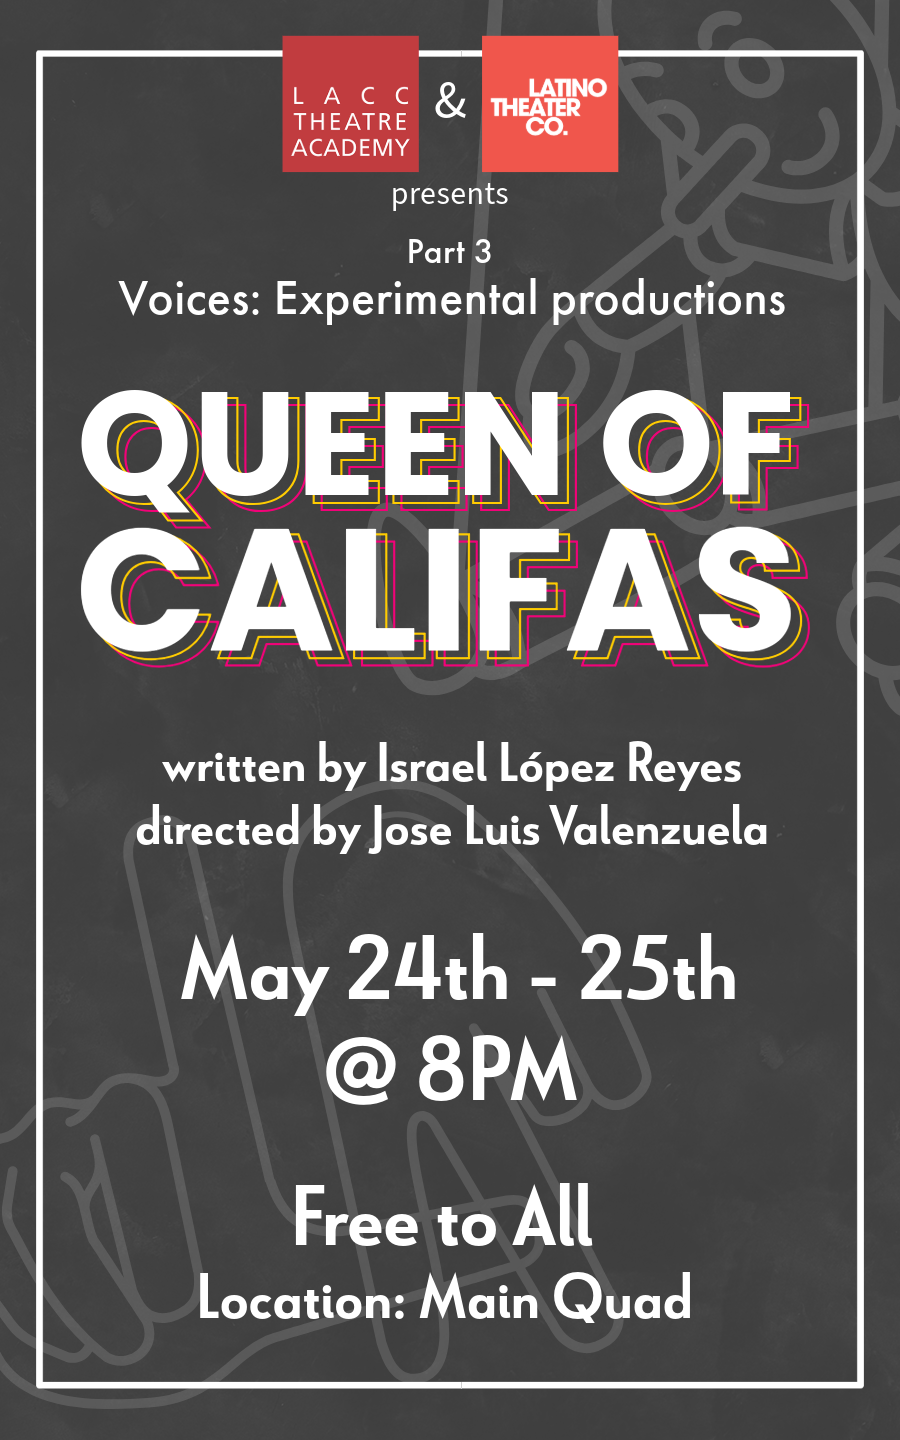 The Third Production, supported by the Latino Theater Company: "Queen of Califas," about an untold Latin story set in L.A.